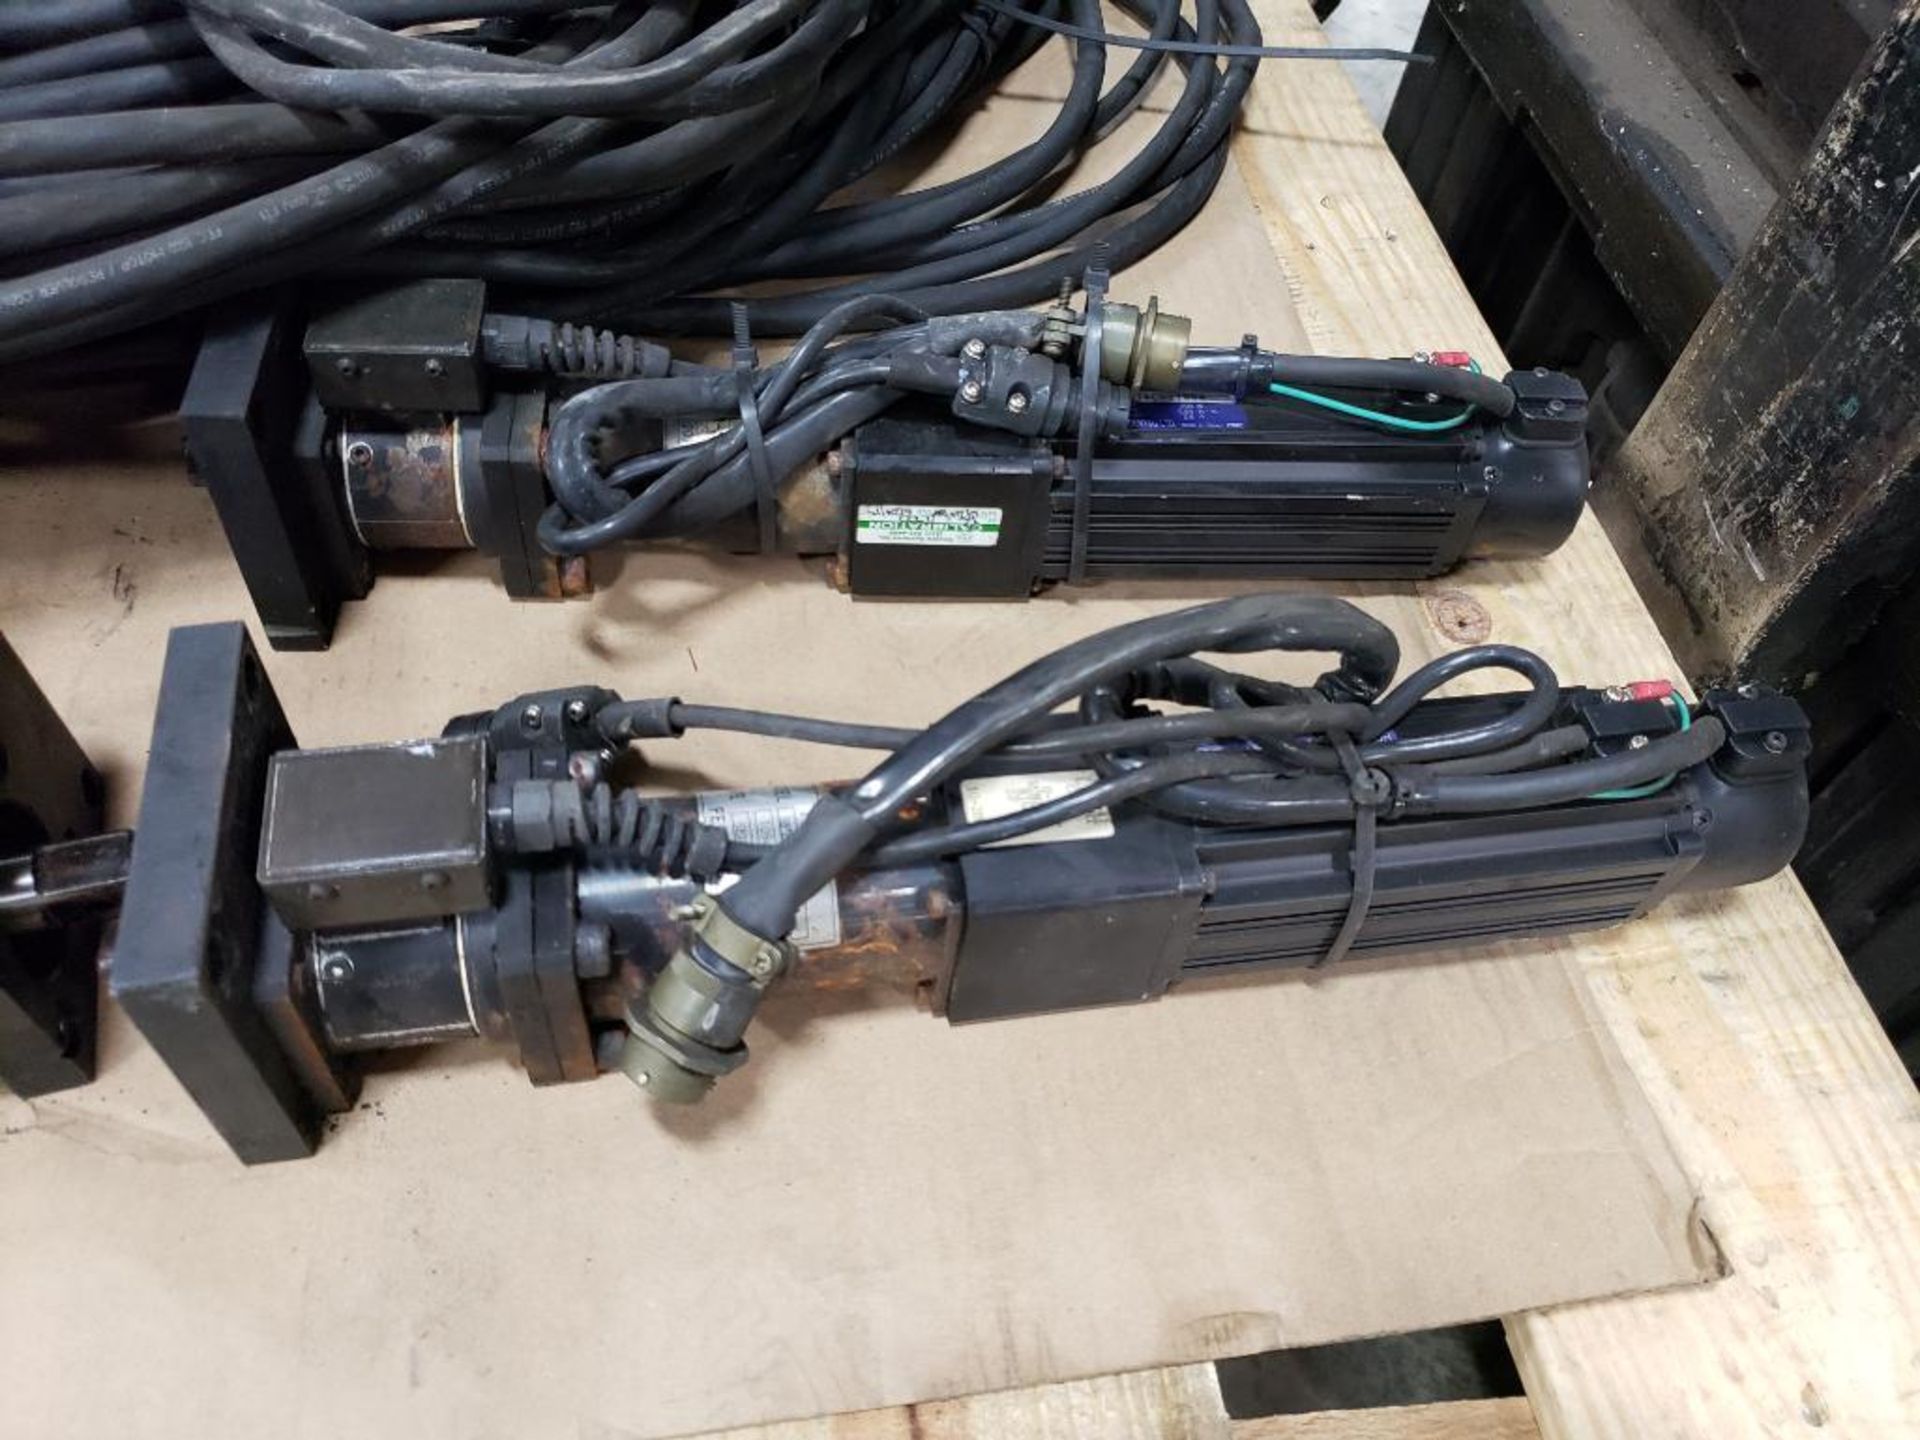 Qty 4 - FEC motorized nut runners NFT-202RM3-S and connection cords. 0.64Nm-Torque. - Image 11 of 16